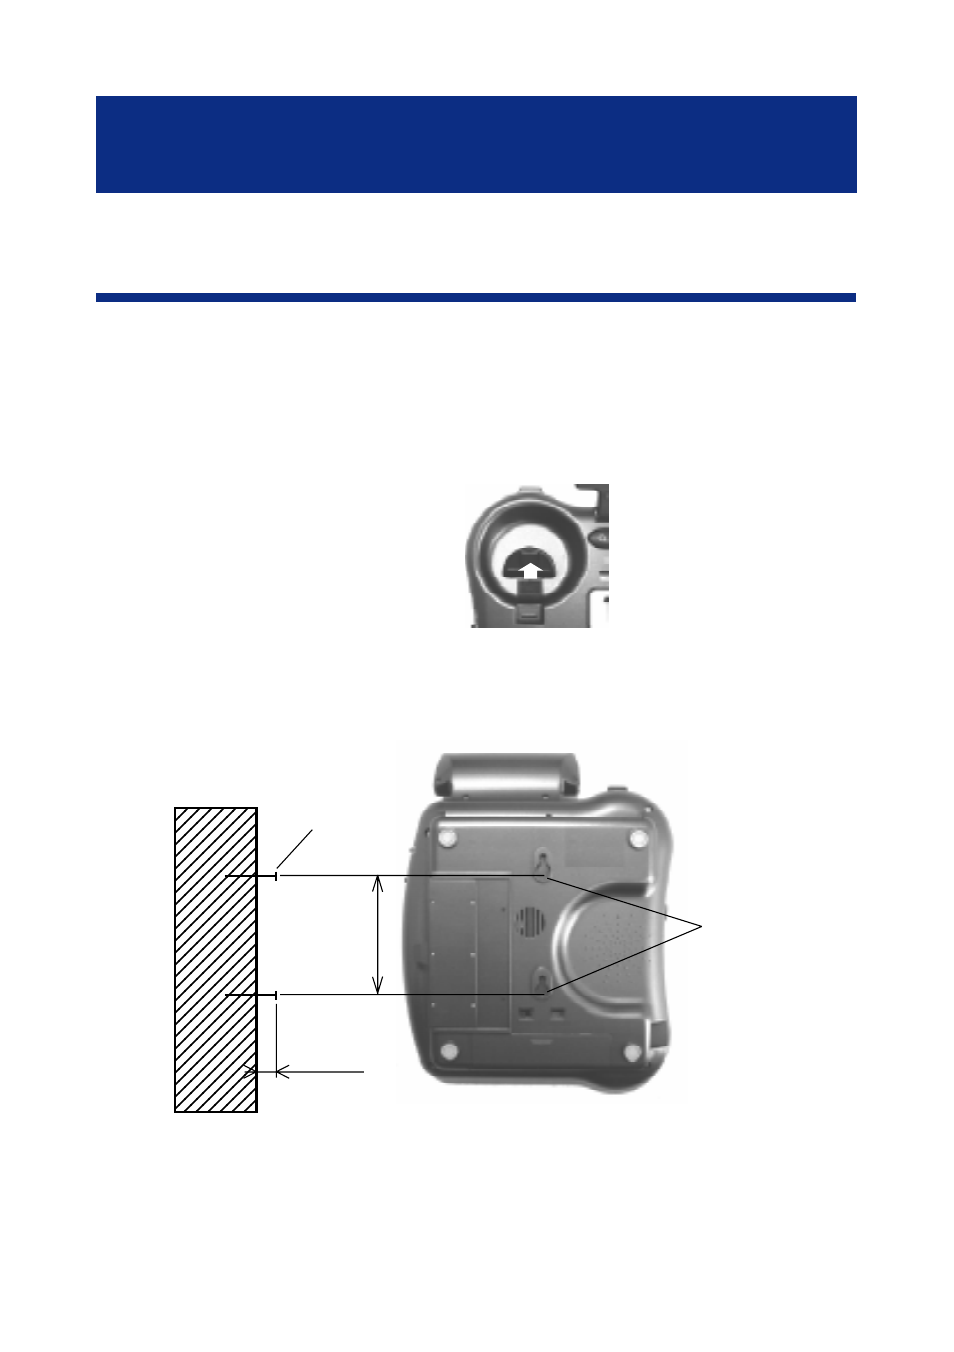 Installation, 80 mm, Wall mounting holes 7 mm screw | Geemarc CL400 User Manual | Page 11 / 47